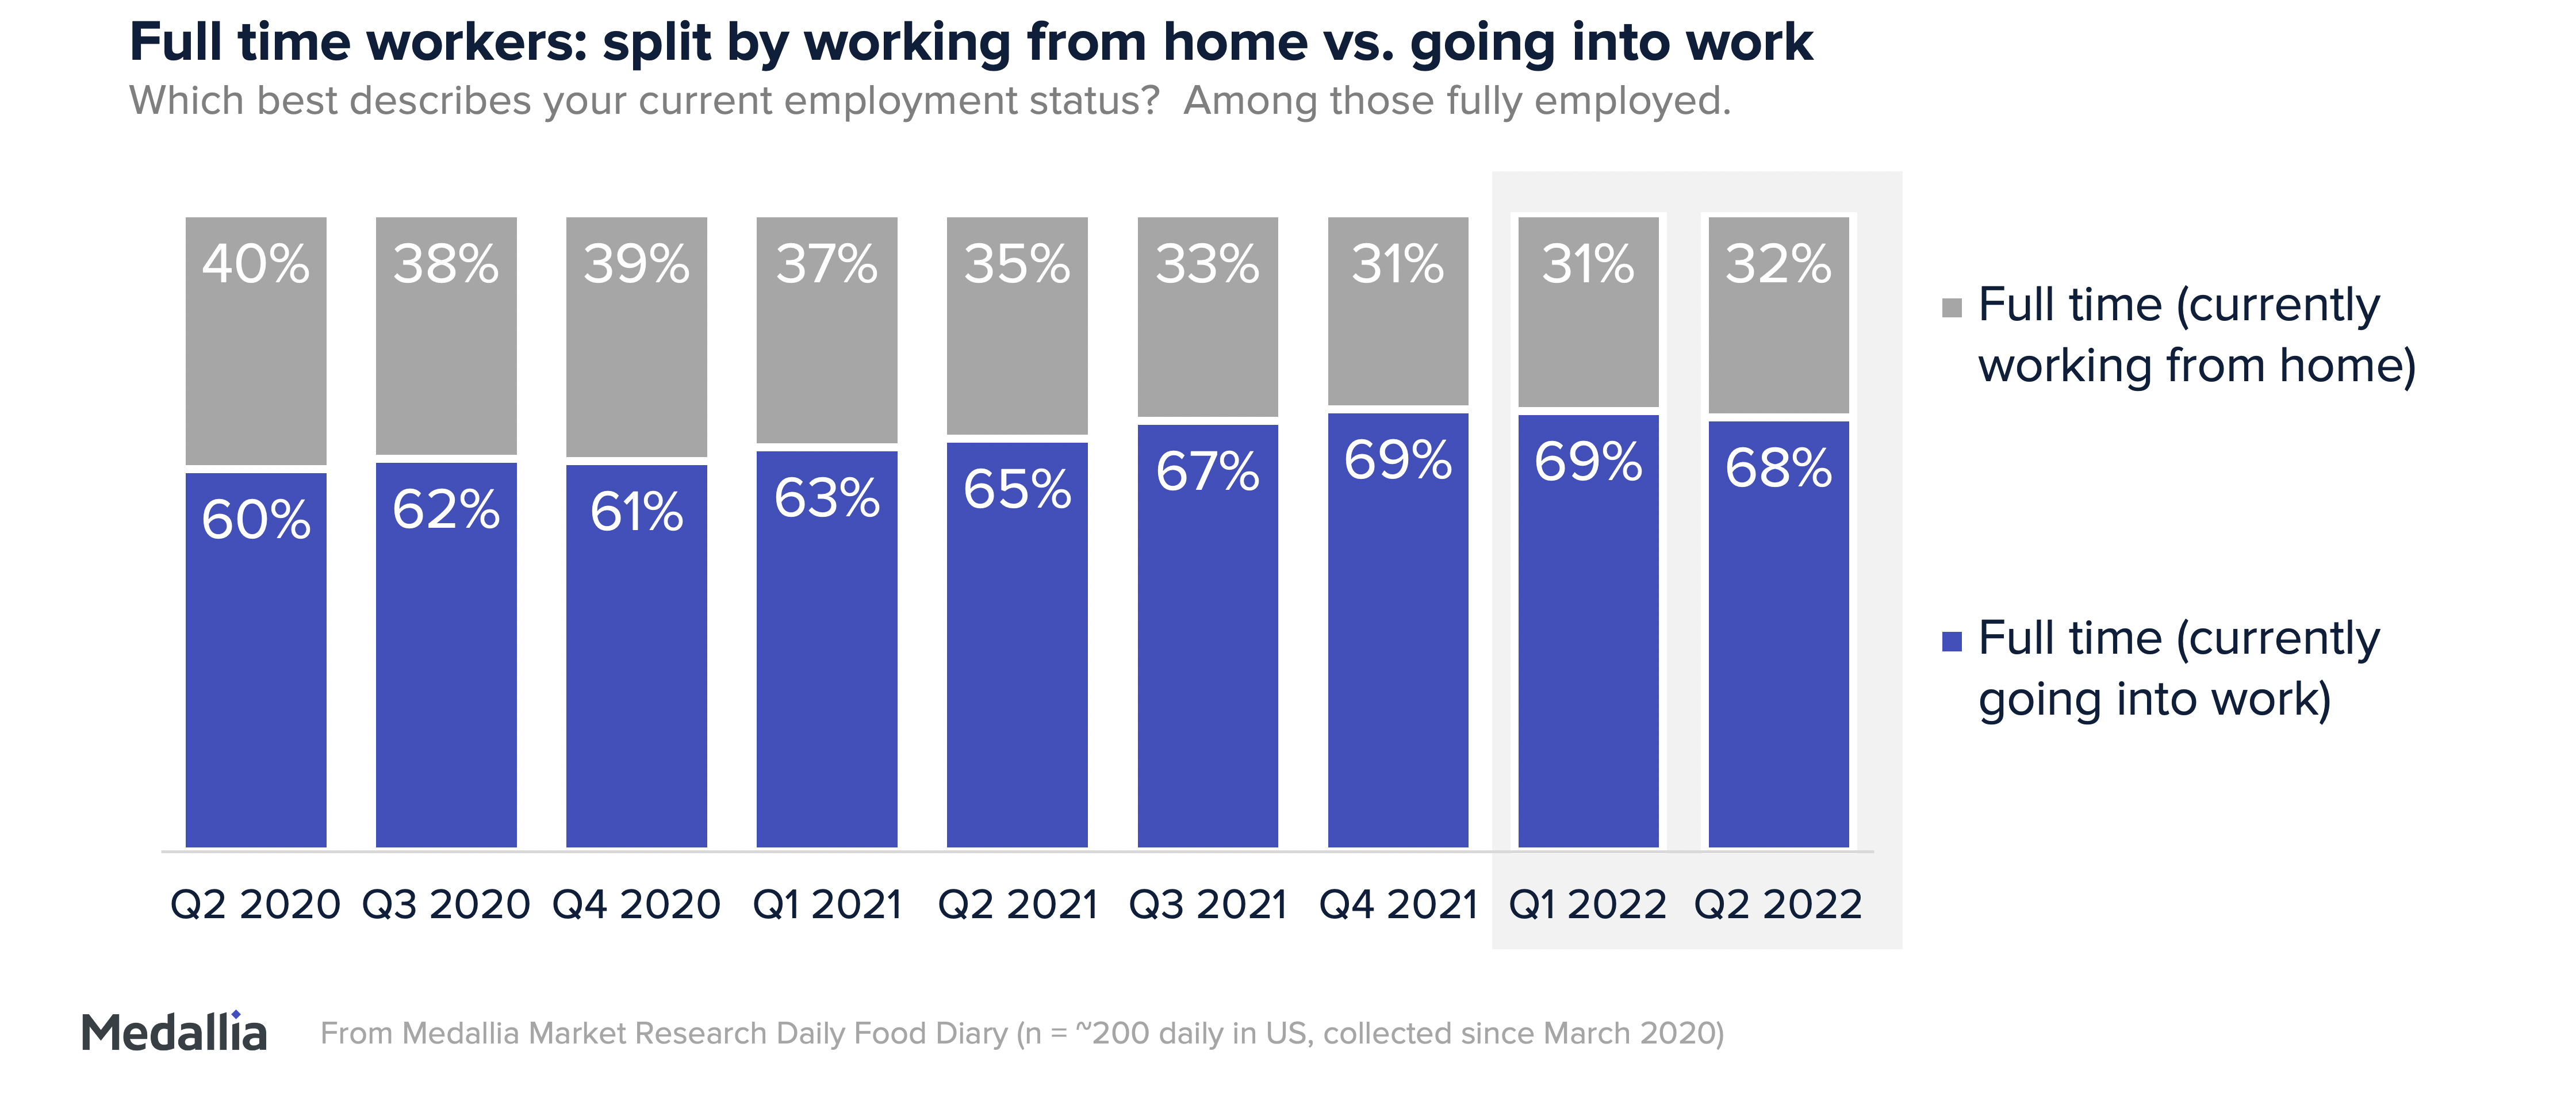 Full time workers, split by working from home vs going into work. In Q1 2020, 40% were working from home. In Q2 2022, 32% were working from home.